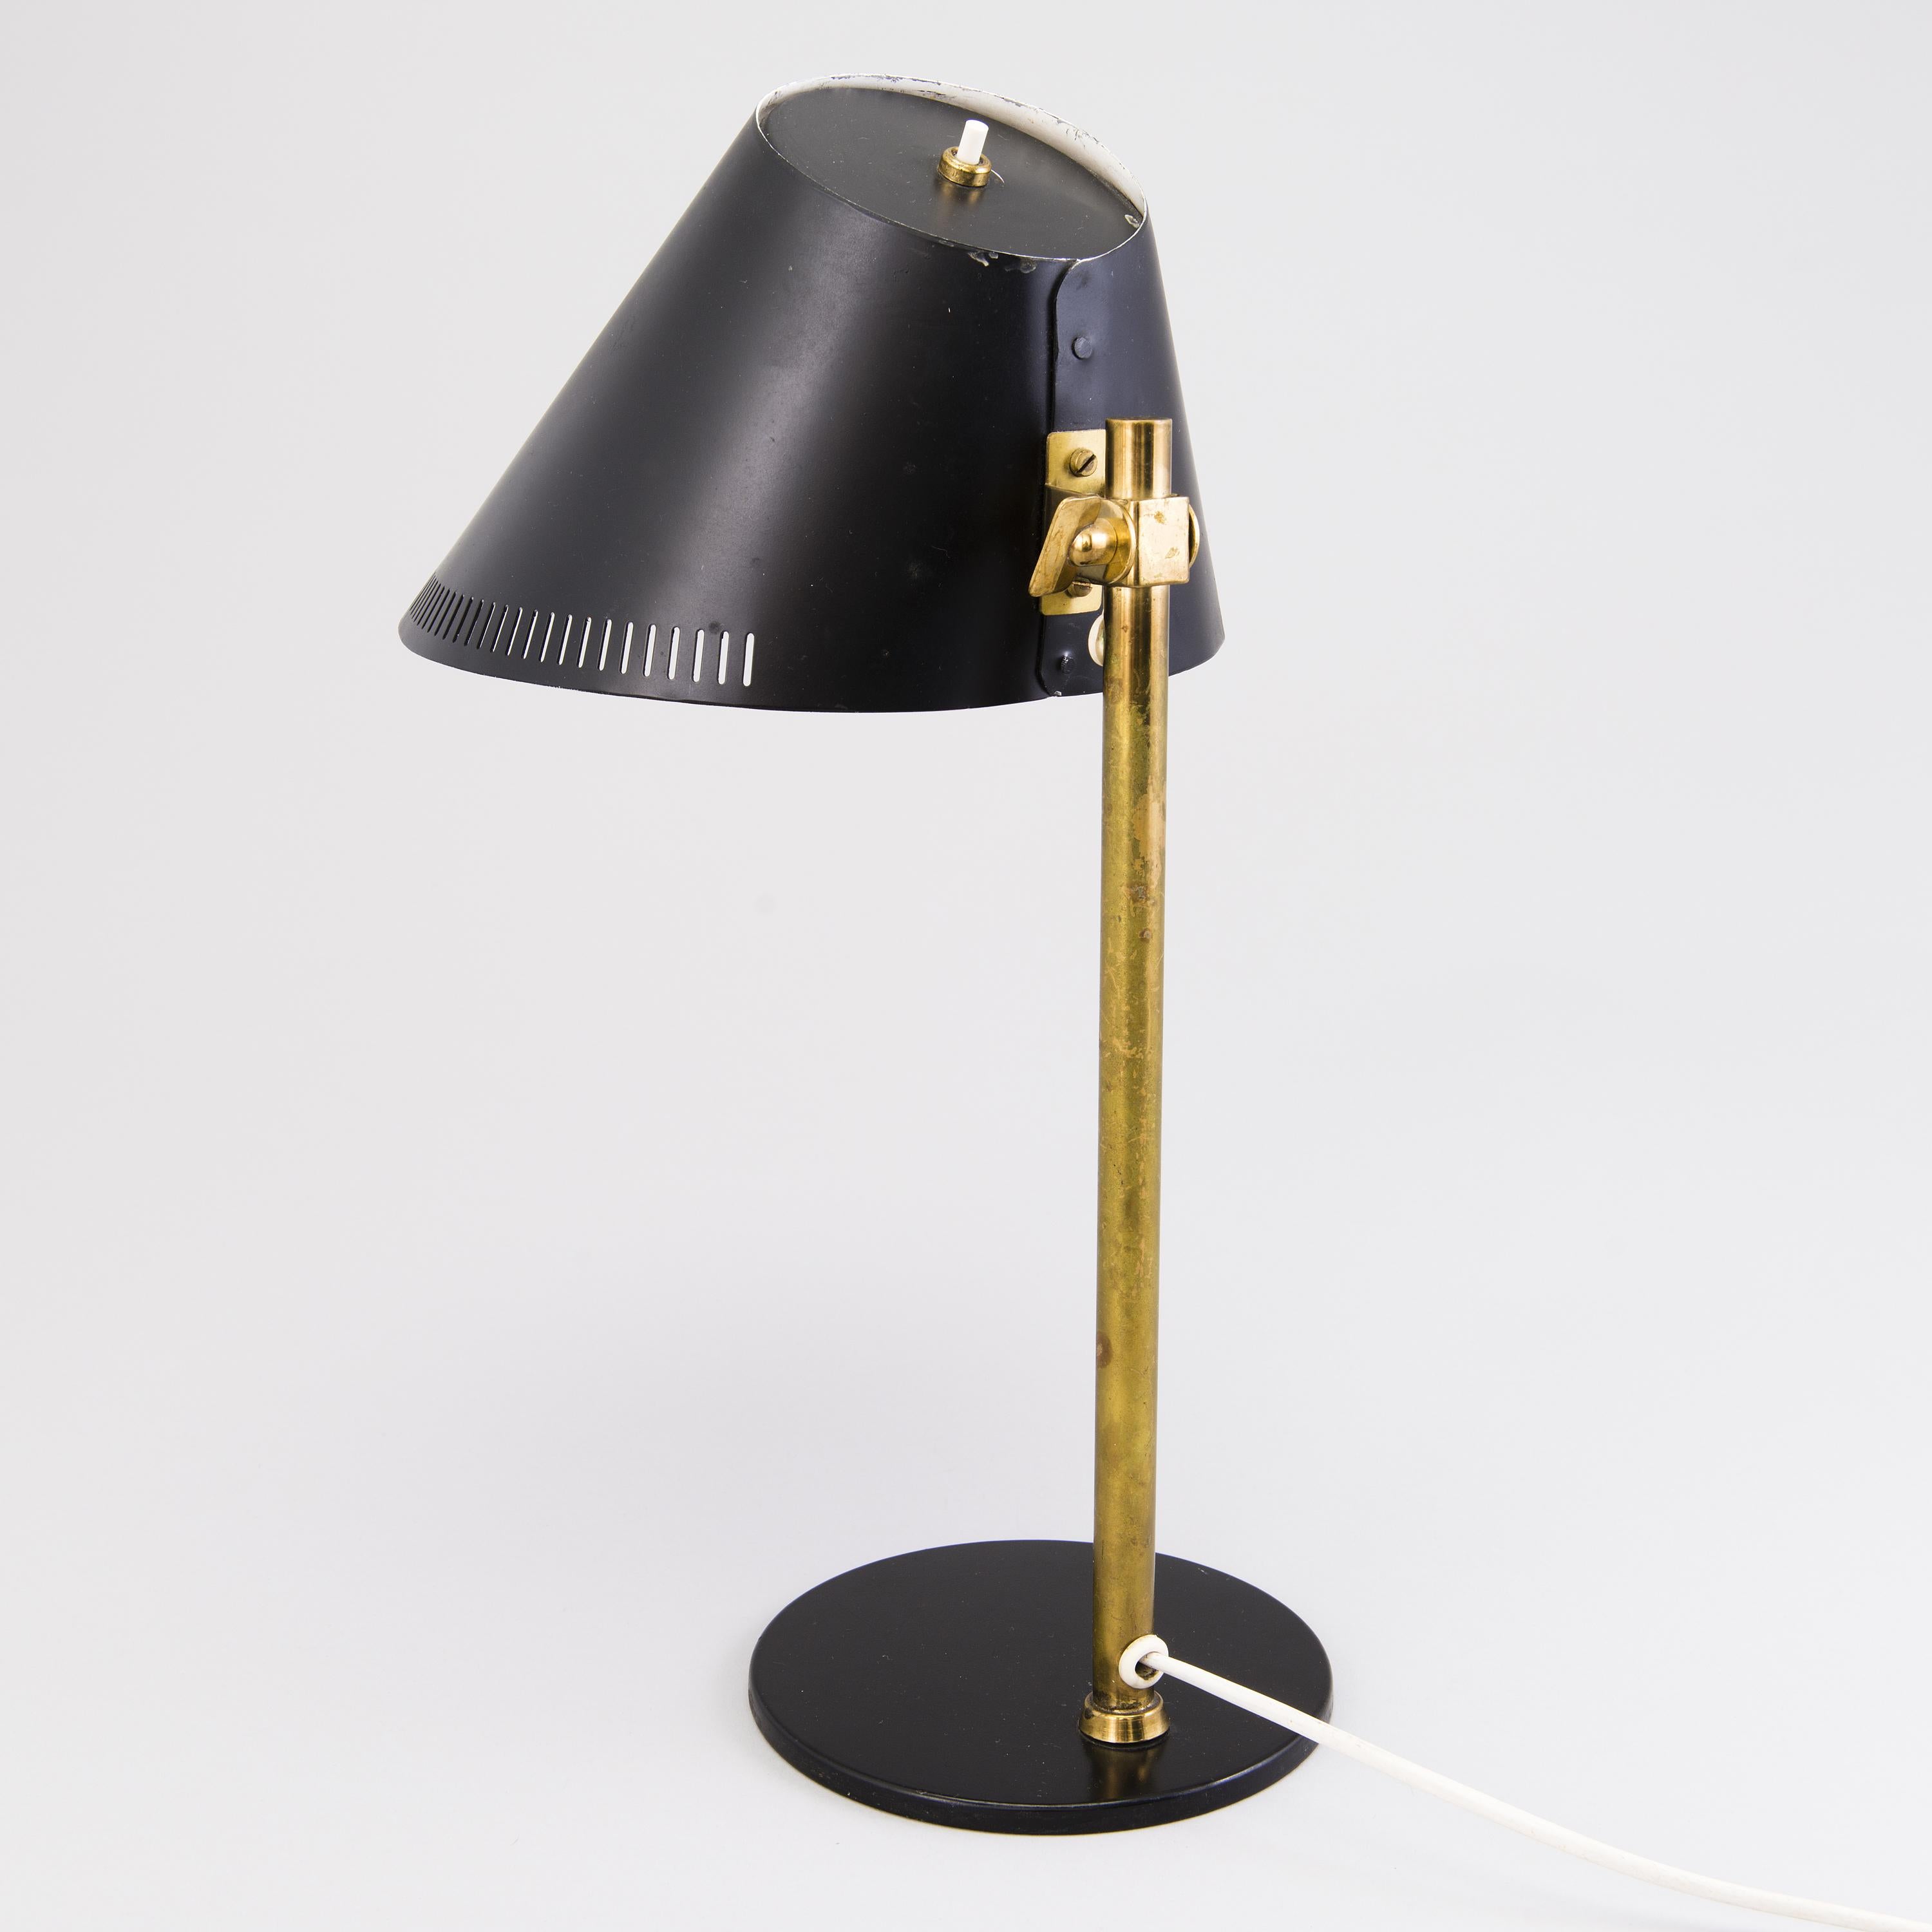 A mid-20th century table lamp, model 9227 designed for Idman by Paavo Tynell.
Brass and black painted metal. Manufacturer's mark.
Can be rewired upon request.